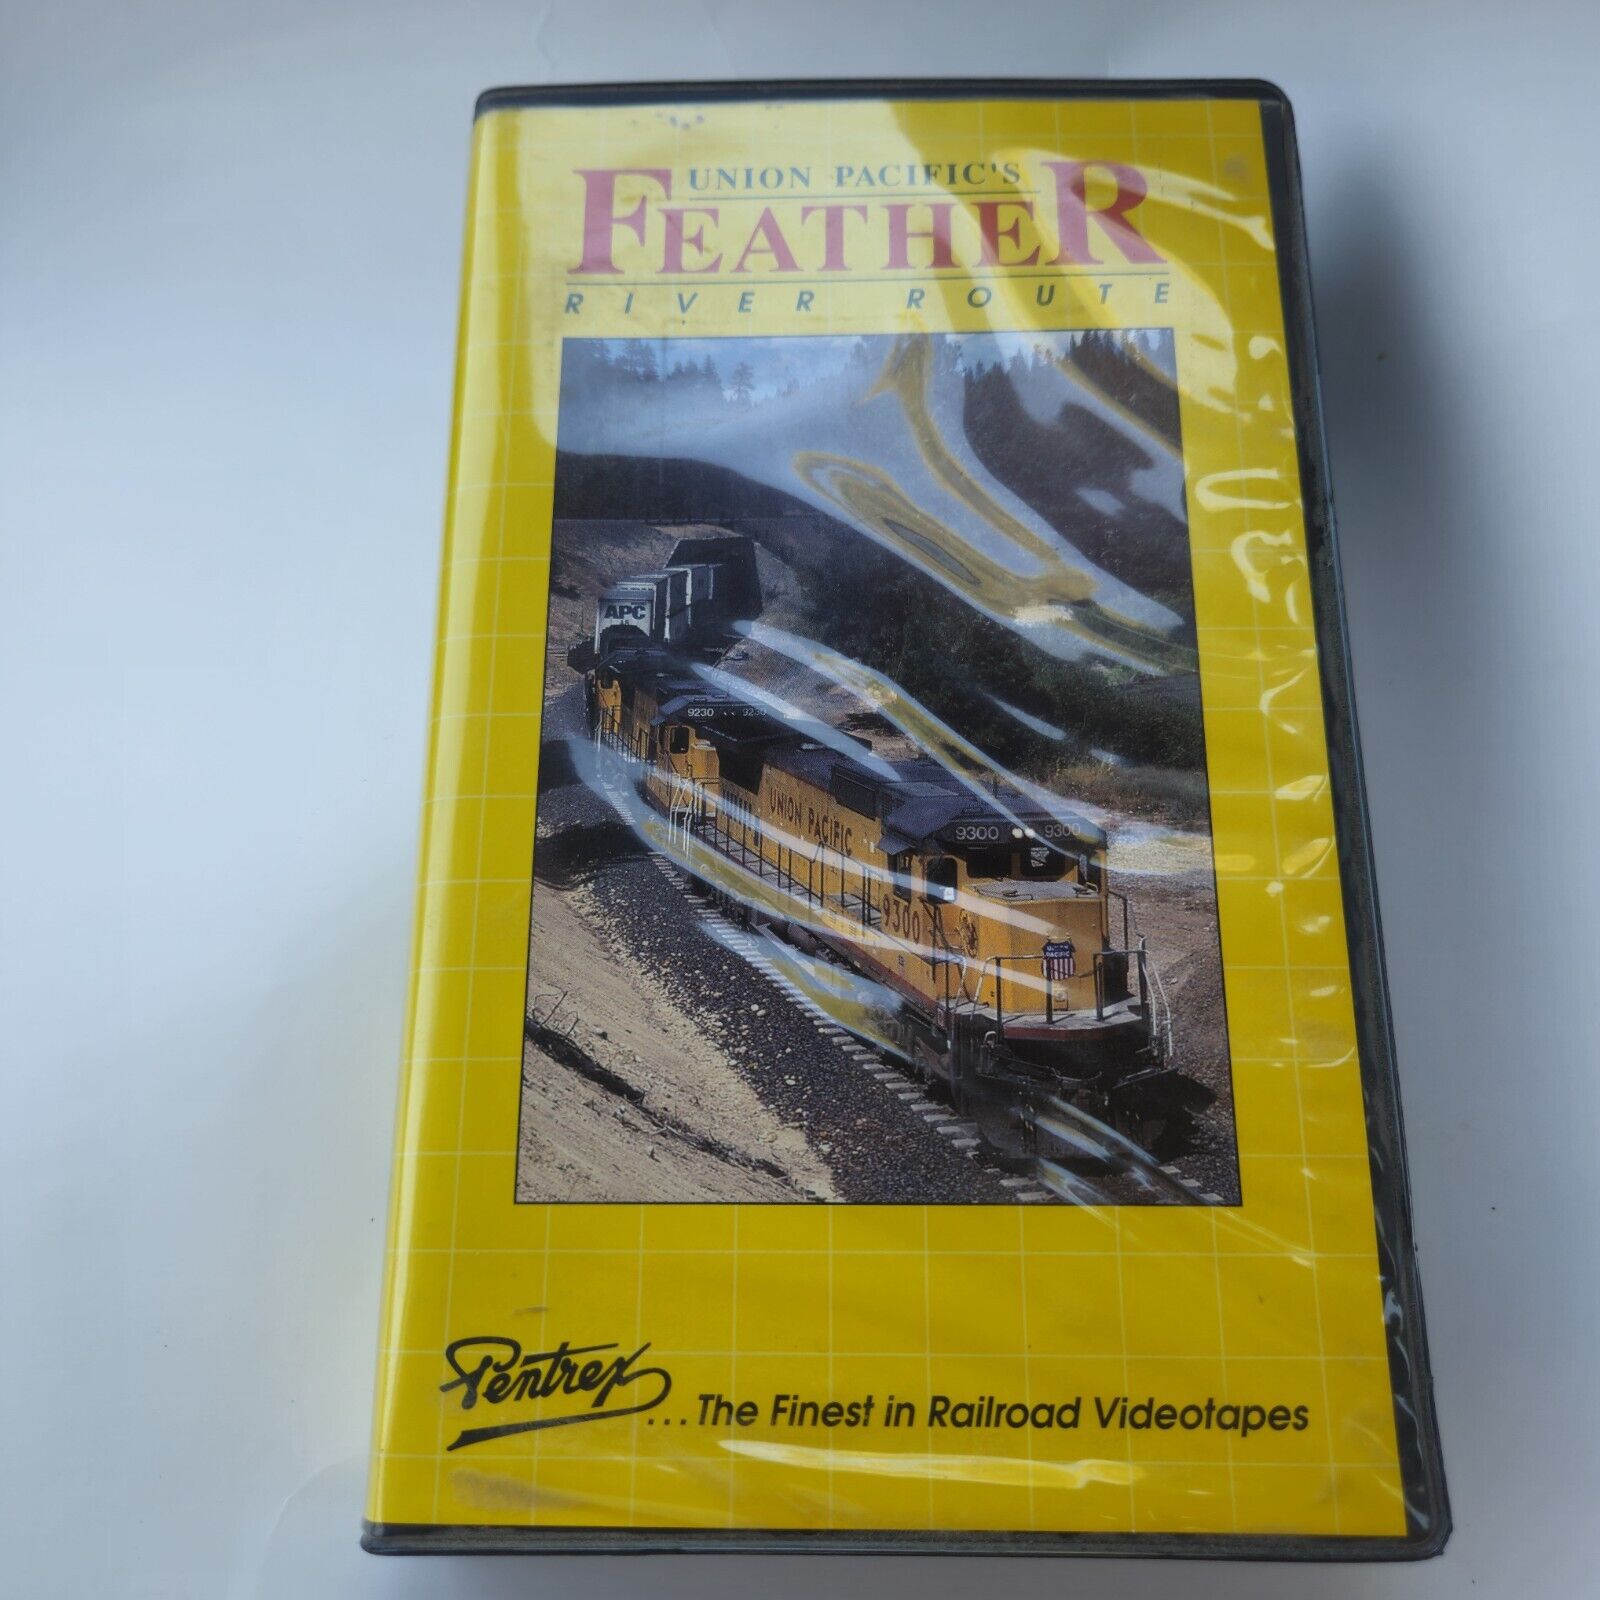 Union Pacific\'s Feather River Route Clamshell VHS Tape Copyright Pentrex 1991